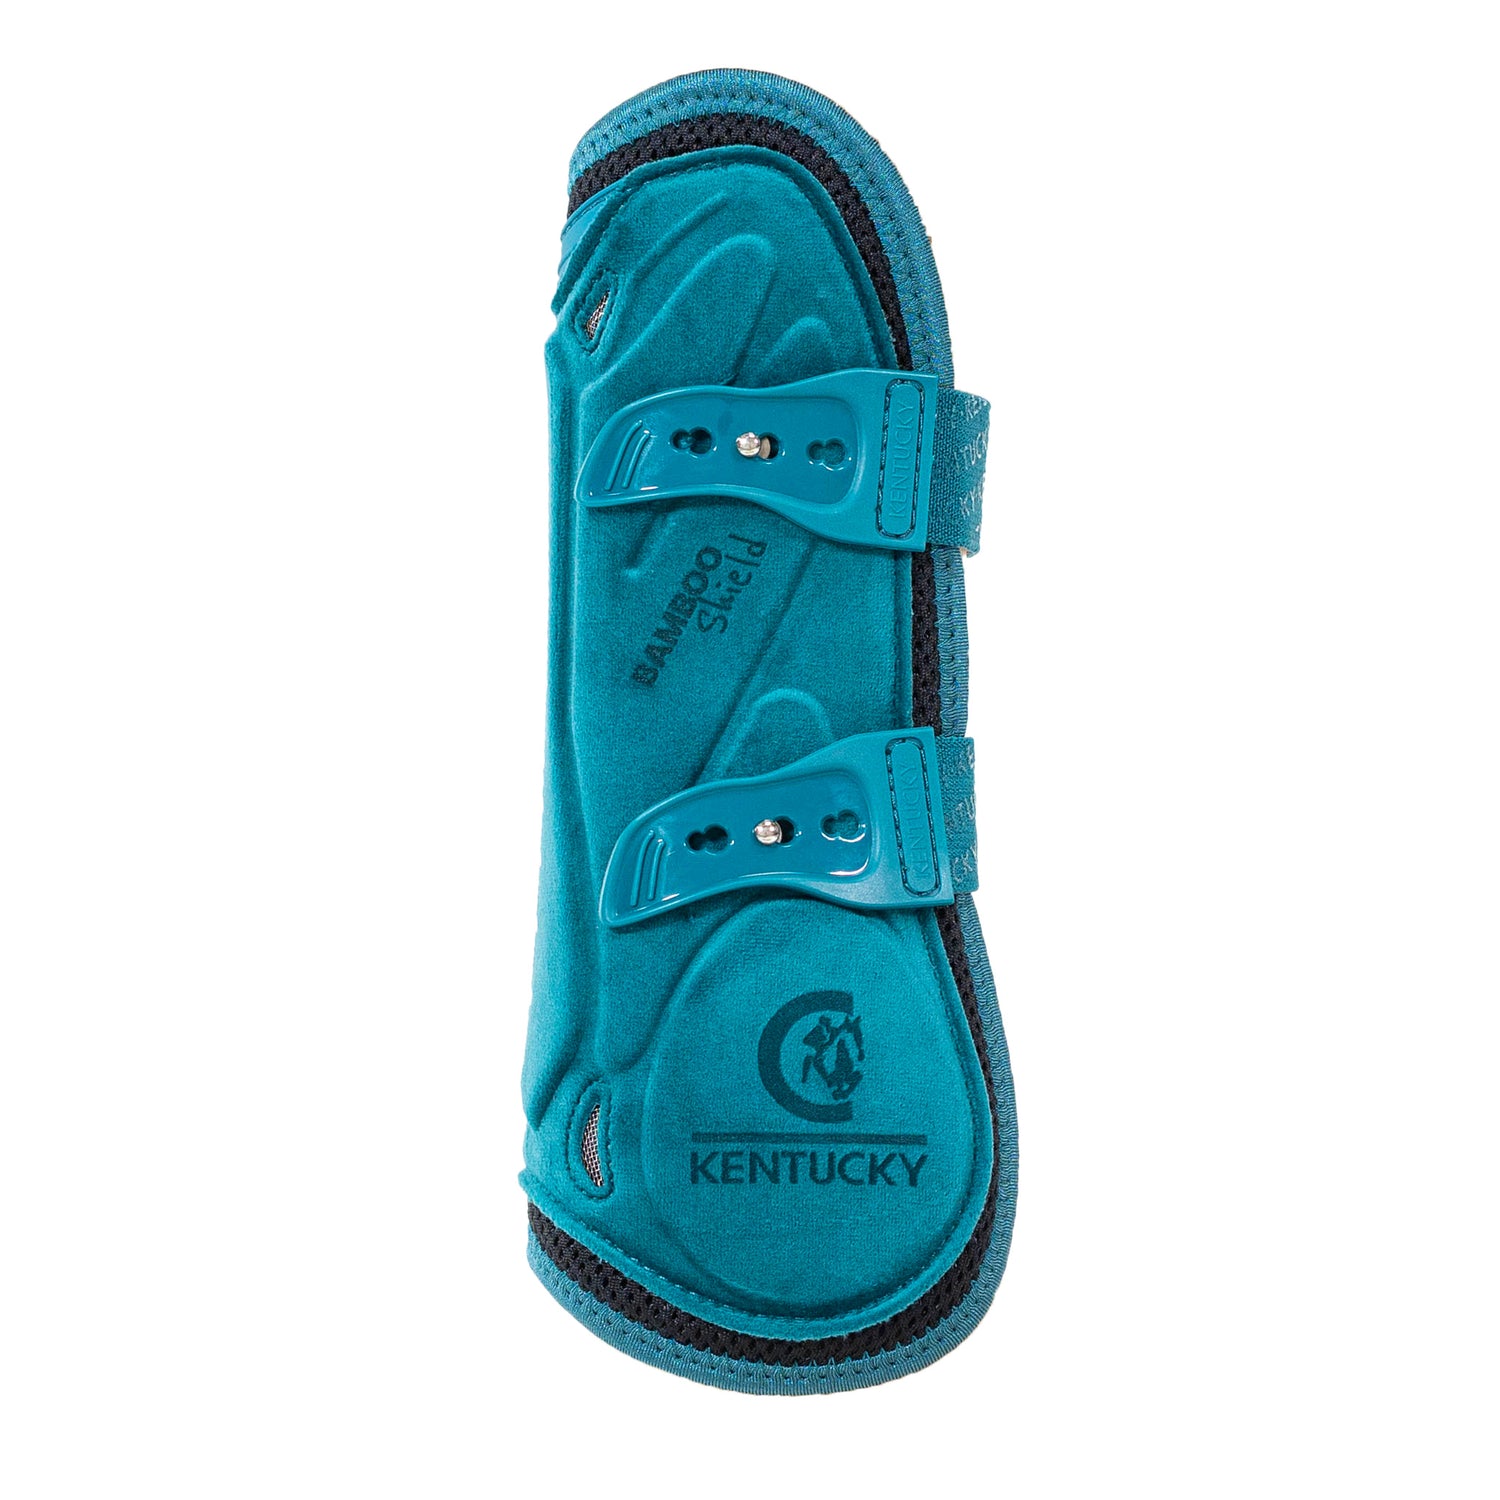 Turquoise Tendon Boots for horses